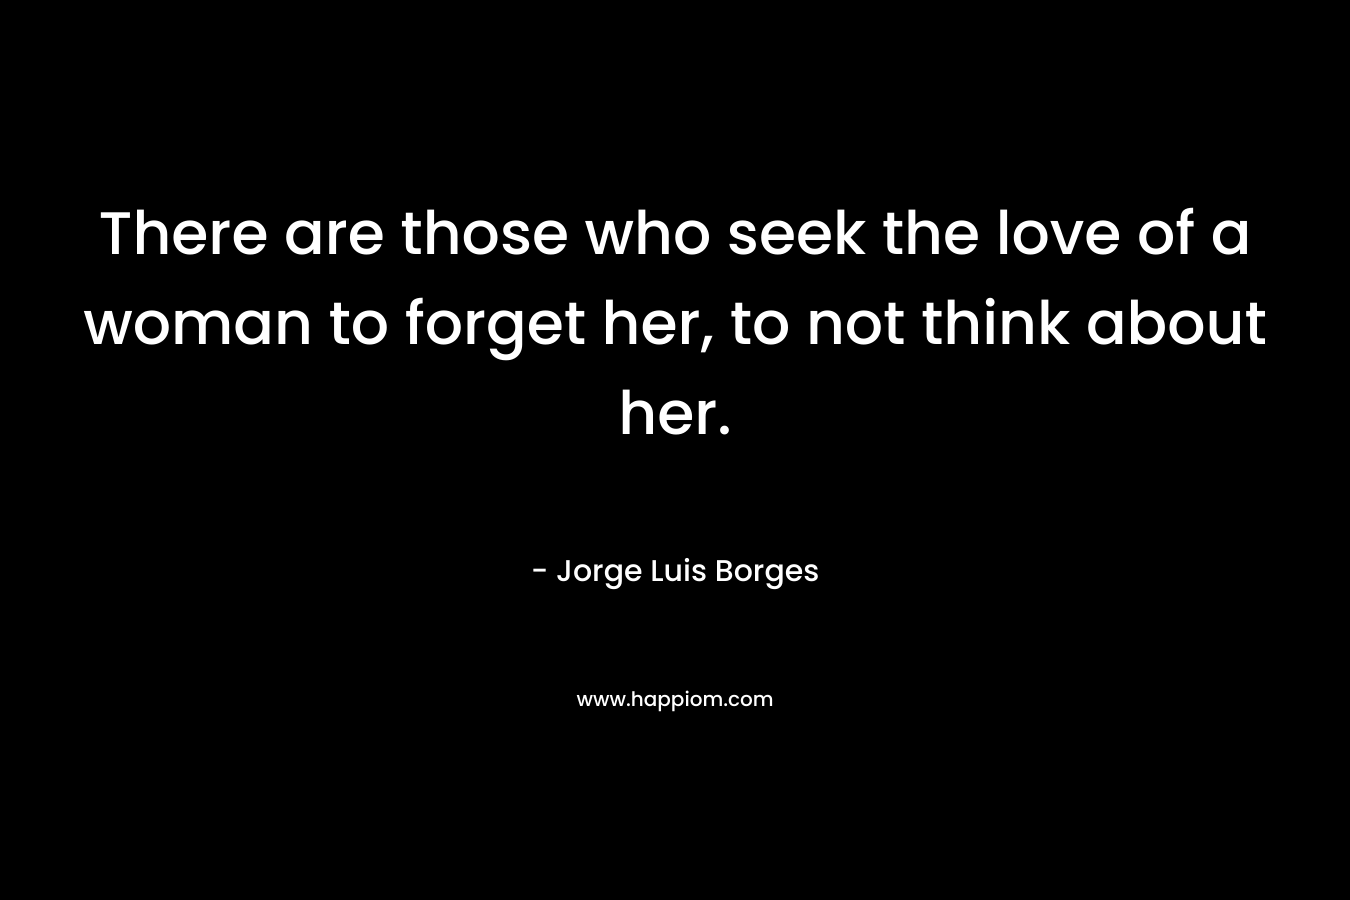 There are those who seek the love of a woman to forget her, to not think about her.